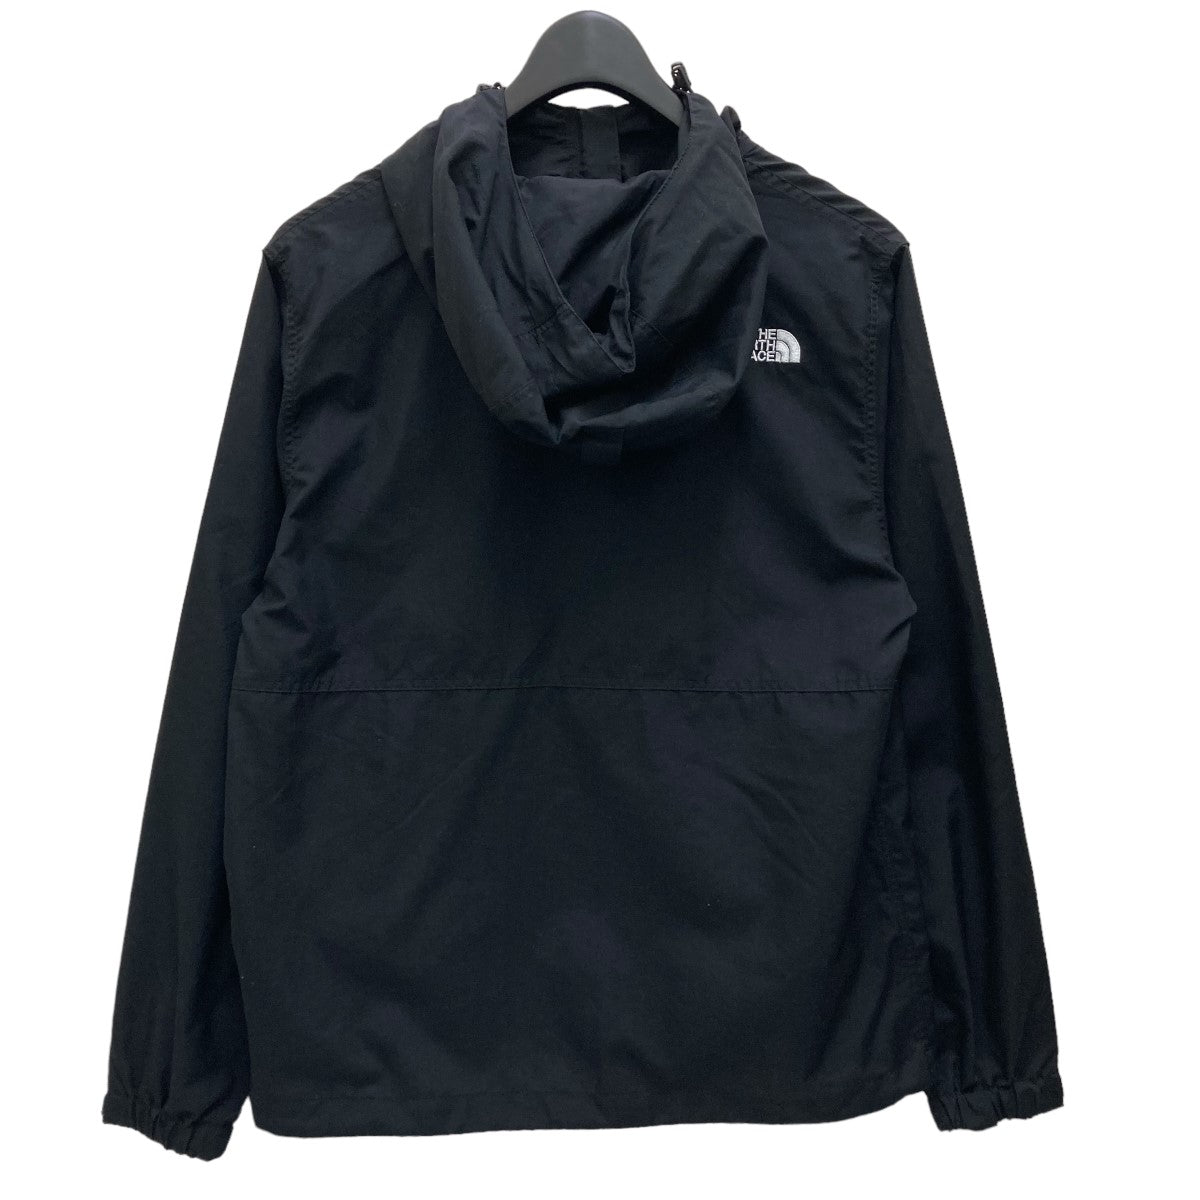 THE NORTH FACE(ザノースフェイス) コンパクトジャケット NPW72230 ...